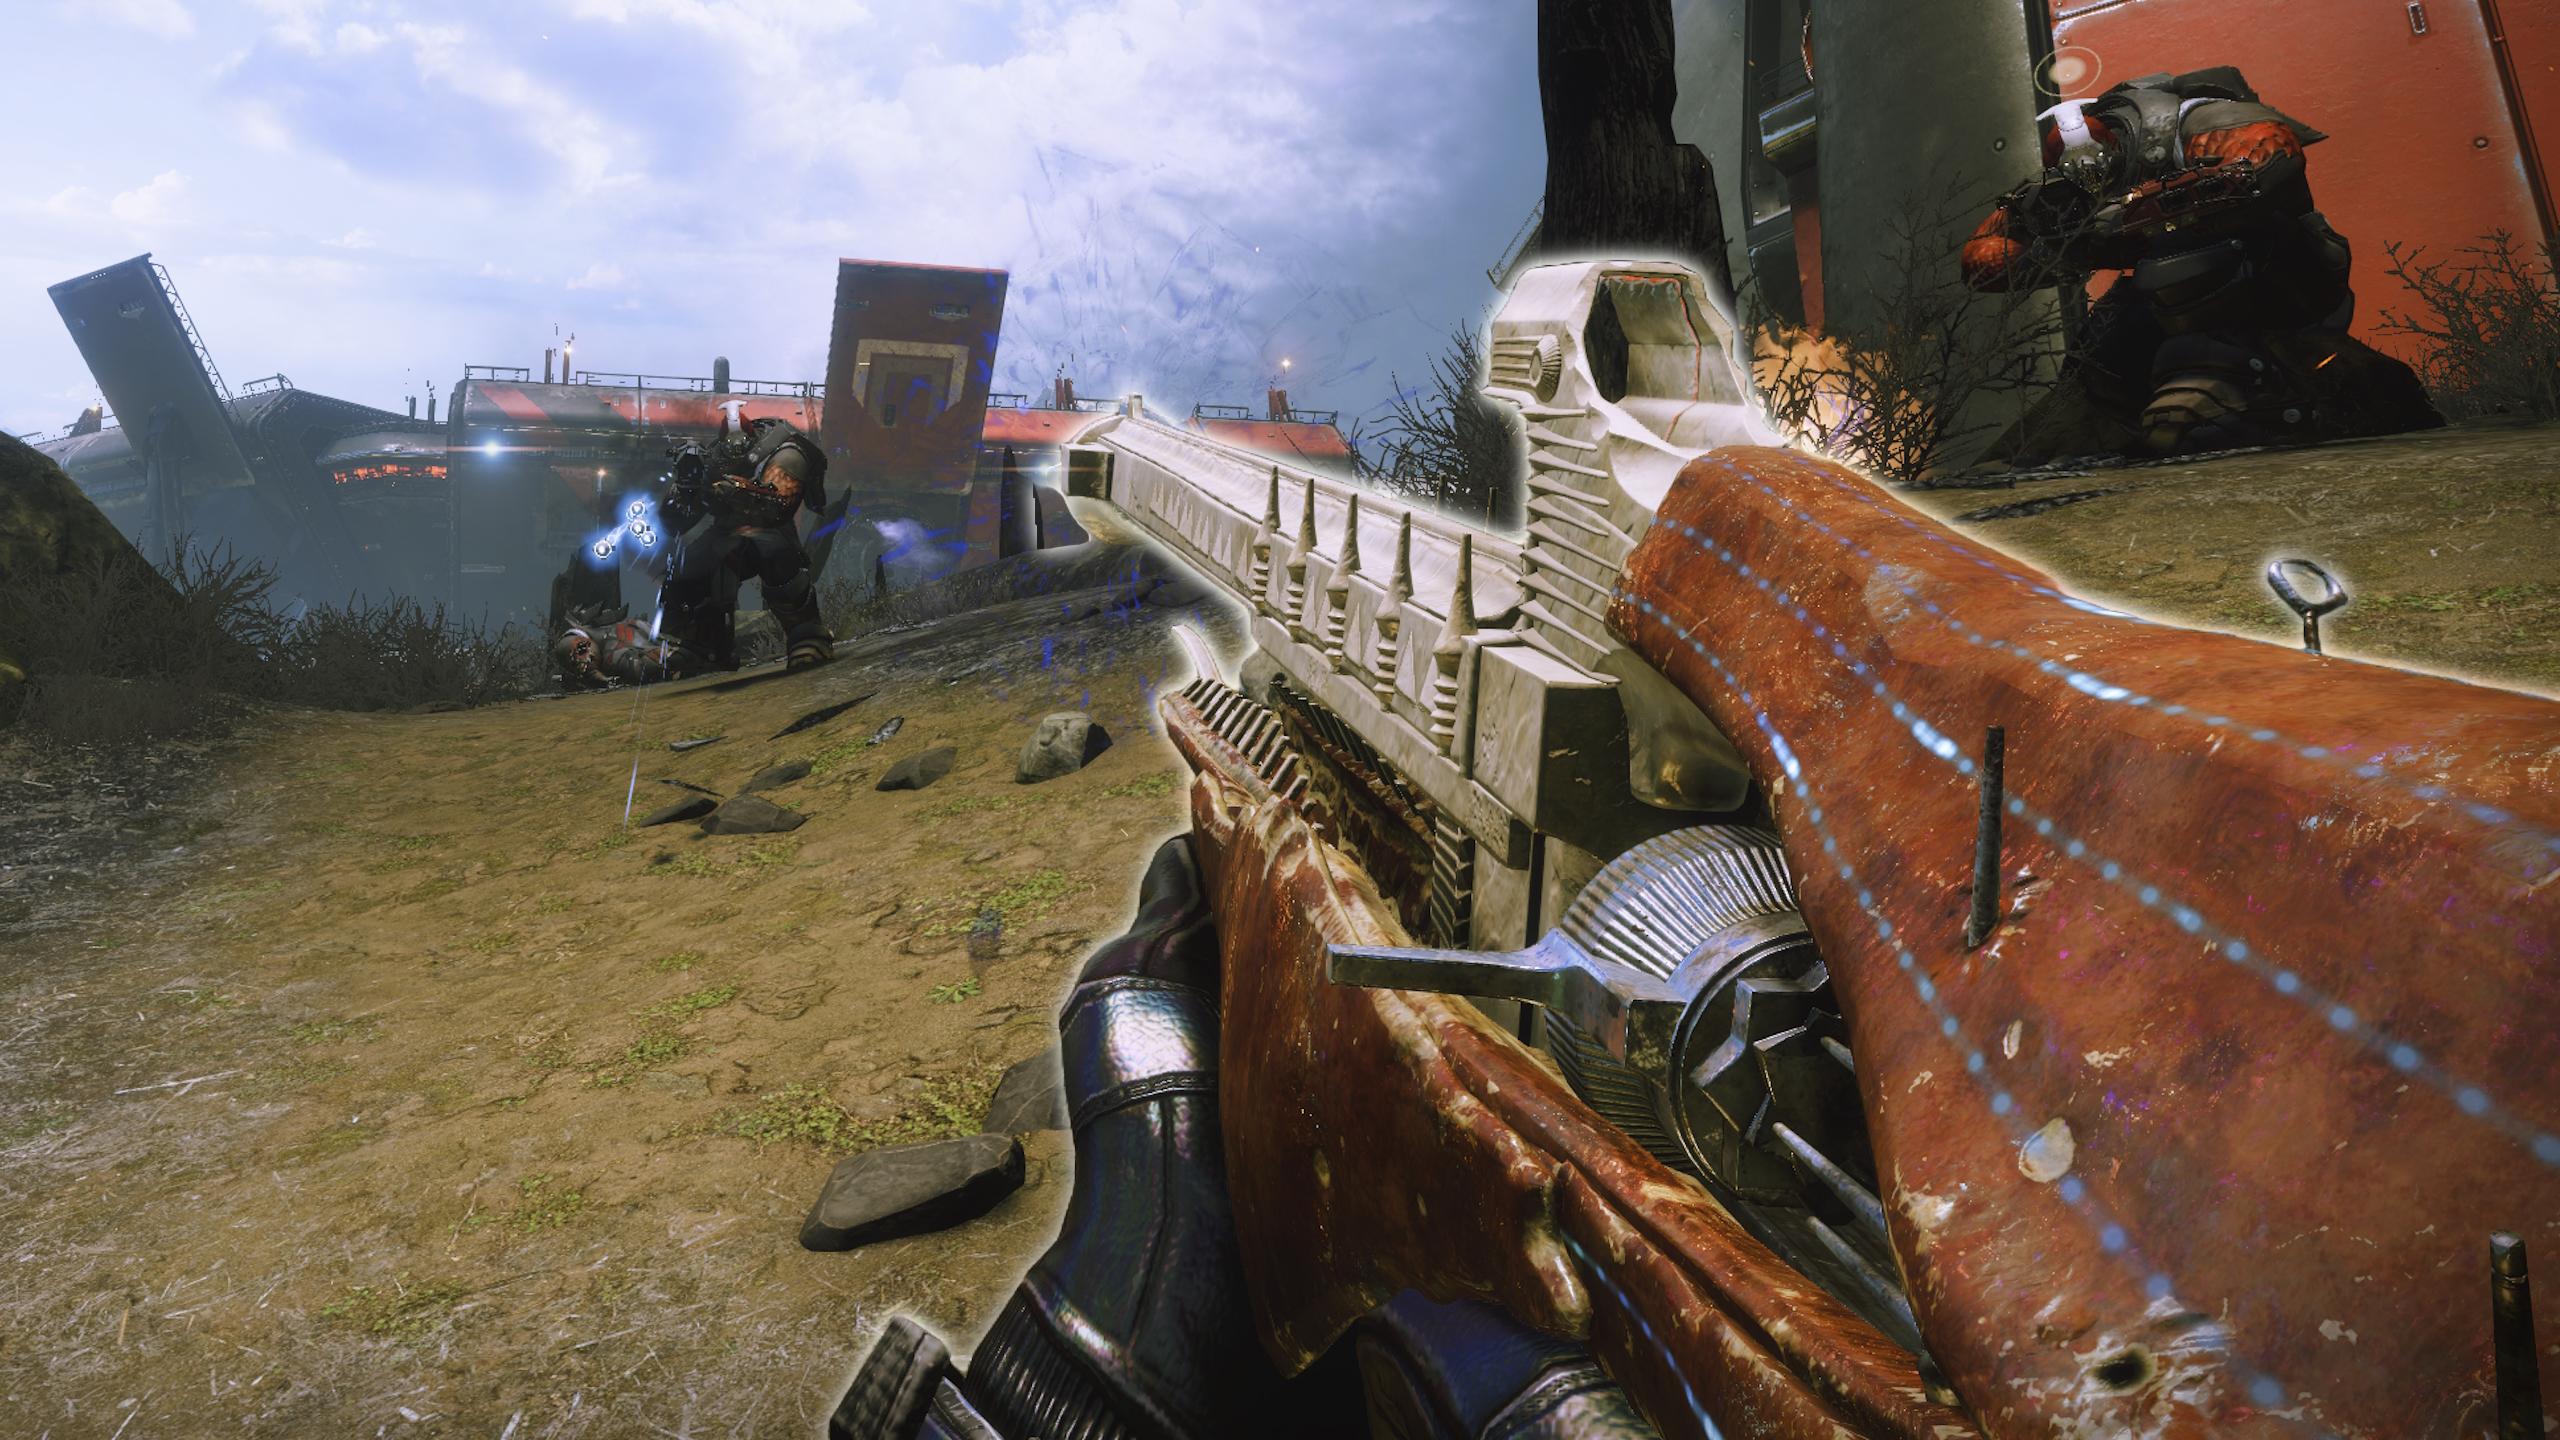 Wicked Implement being fired in Destiny 2 The Final Shape.